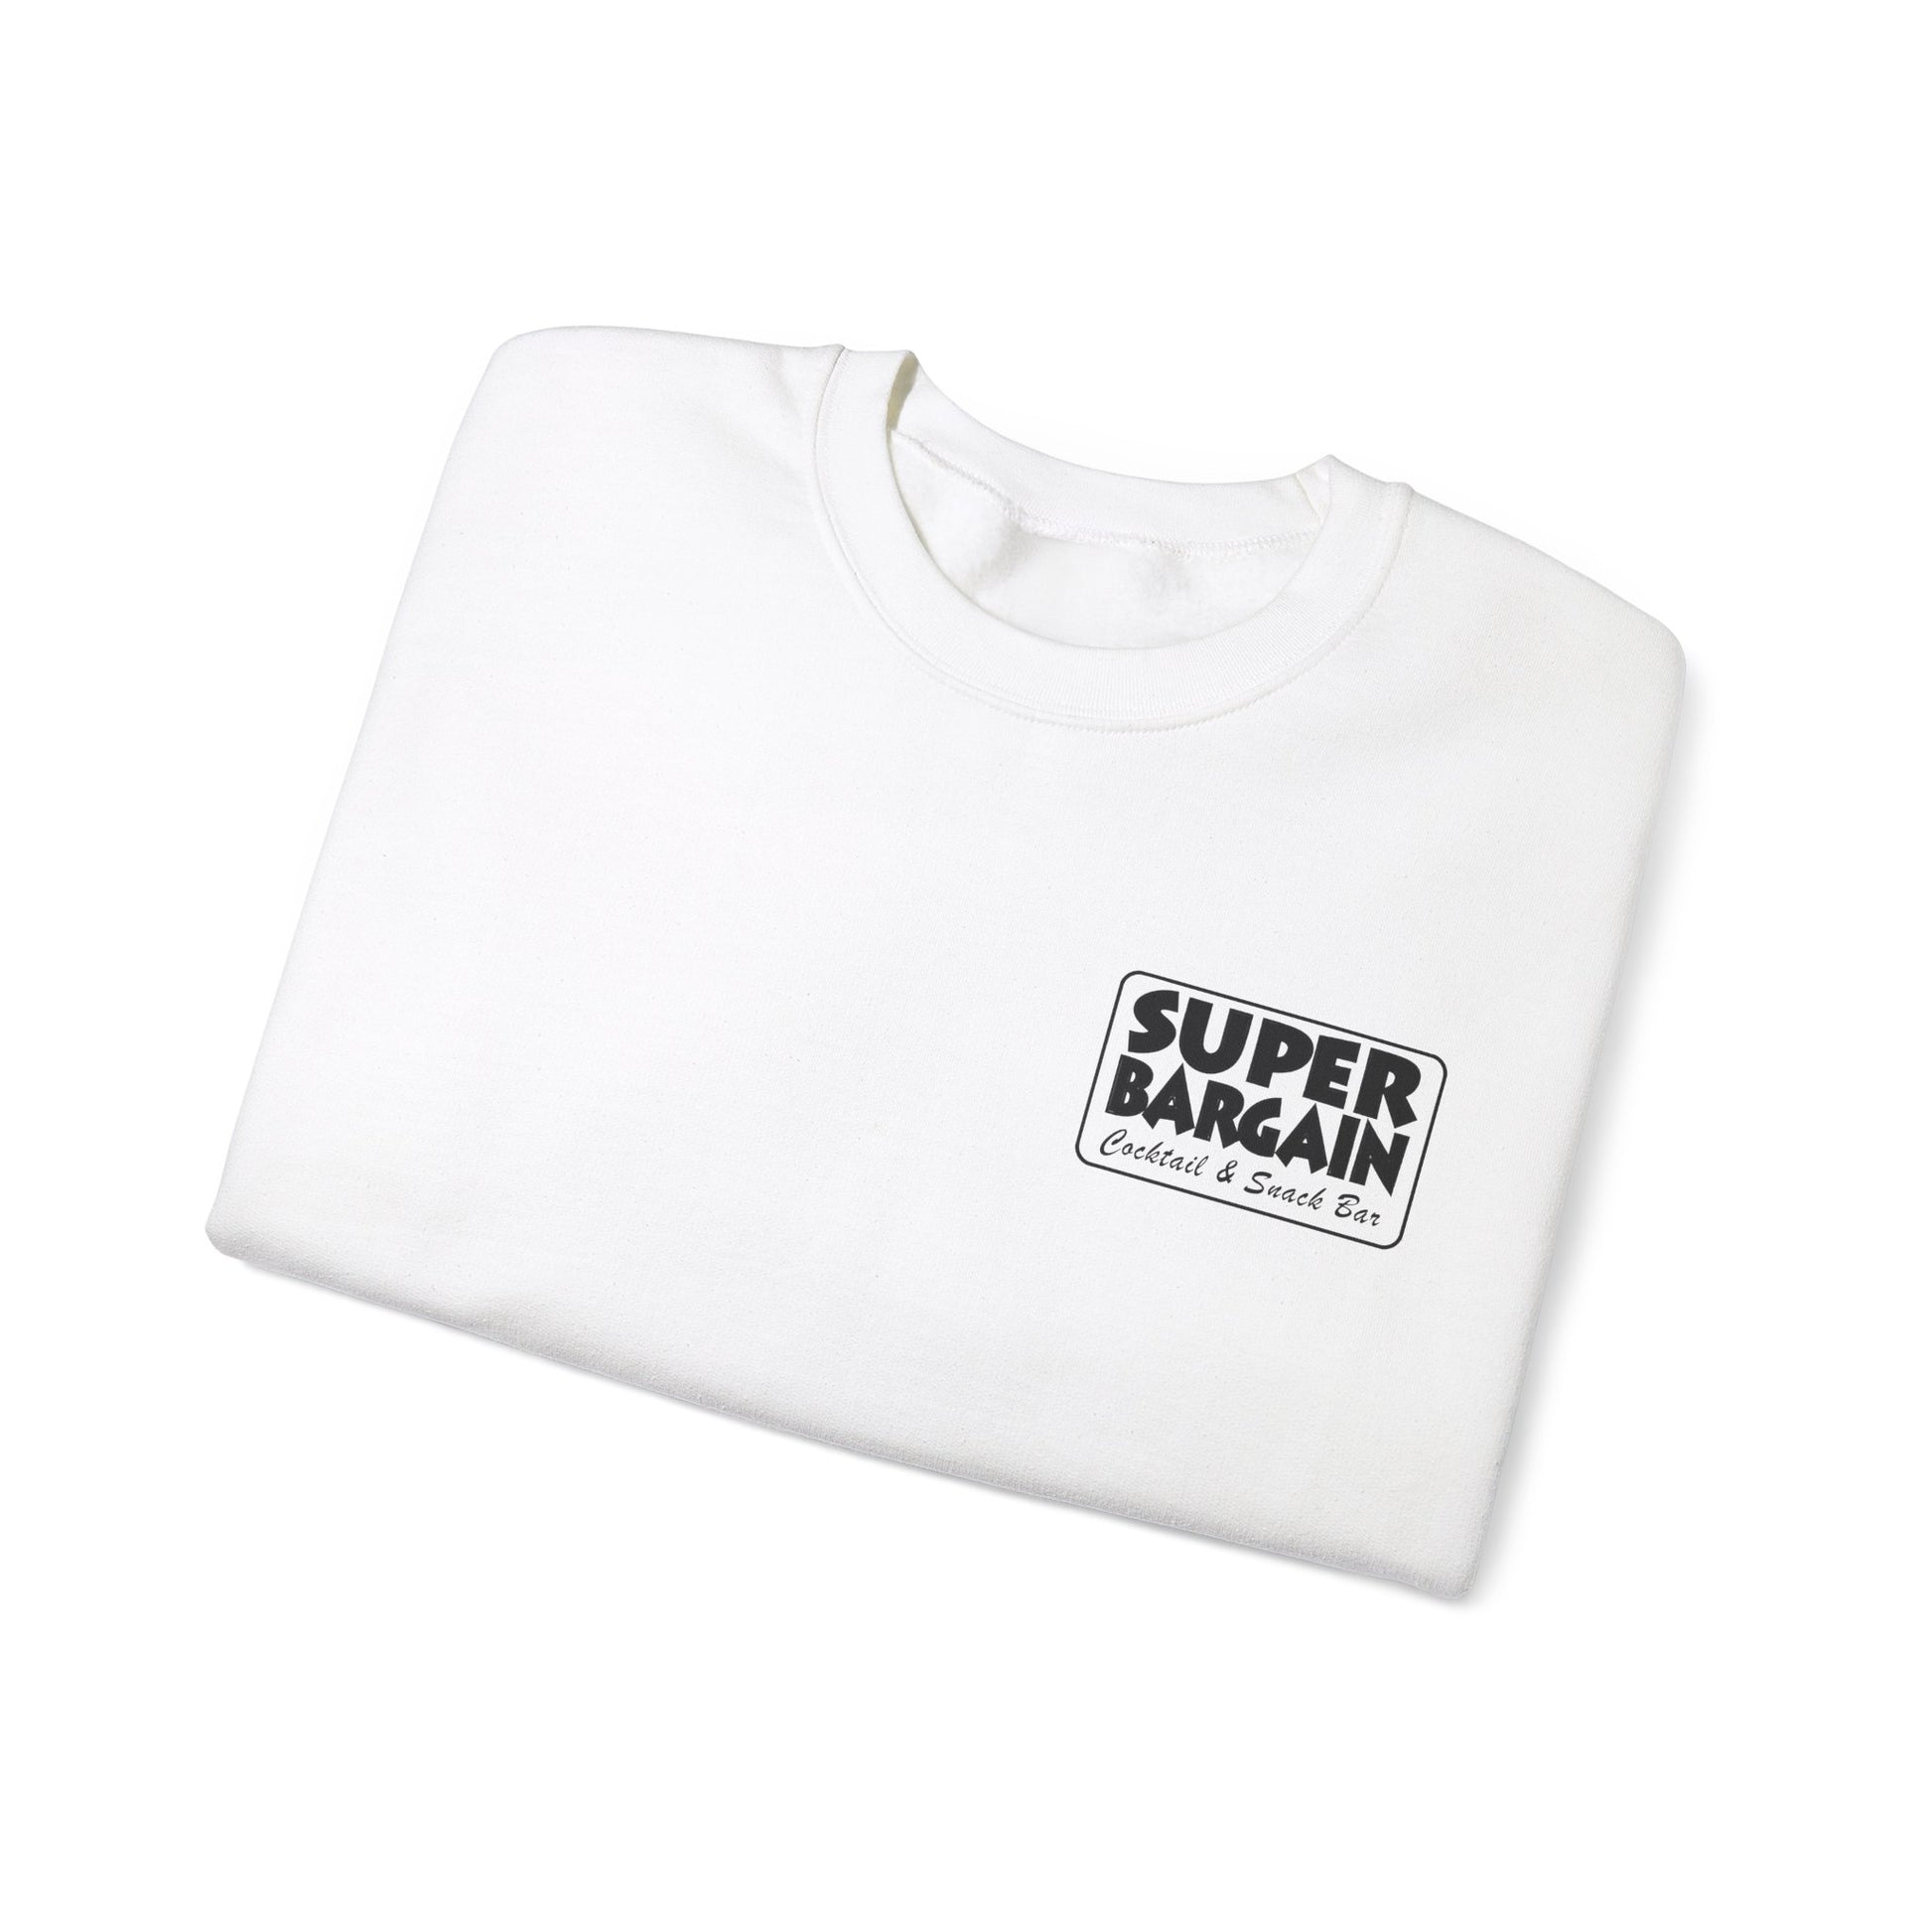 A folded Unisex Heavy Blend™ Crewneck Monochrome Logo Sweatshirt with the logo "SUPER BARGAIN" printed in black on the front, placed on a white background in Cabbagetown, Toronto.